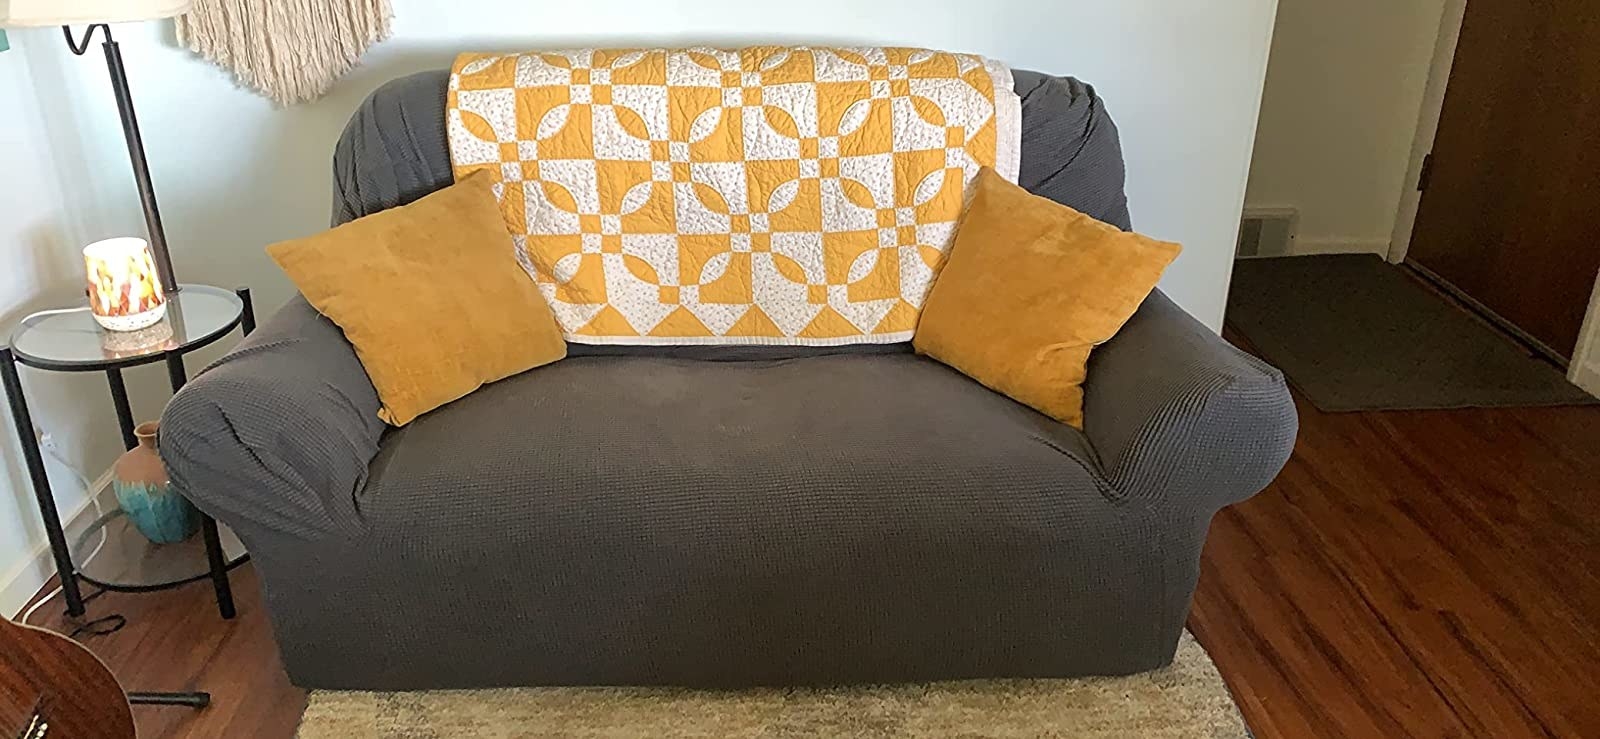 Reviewer image of couch with gray cover on it and yellow throw pillows and blanket